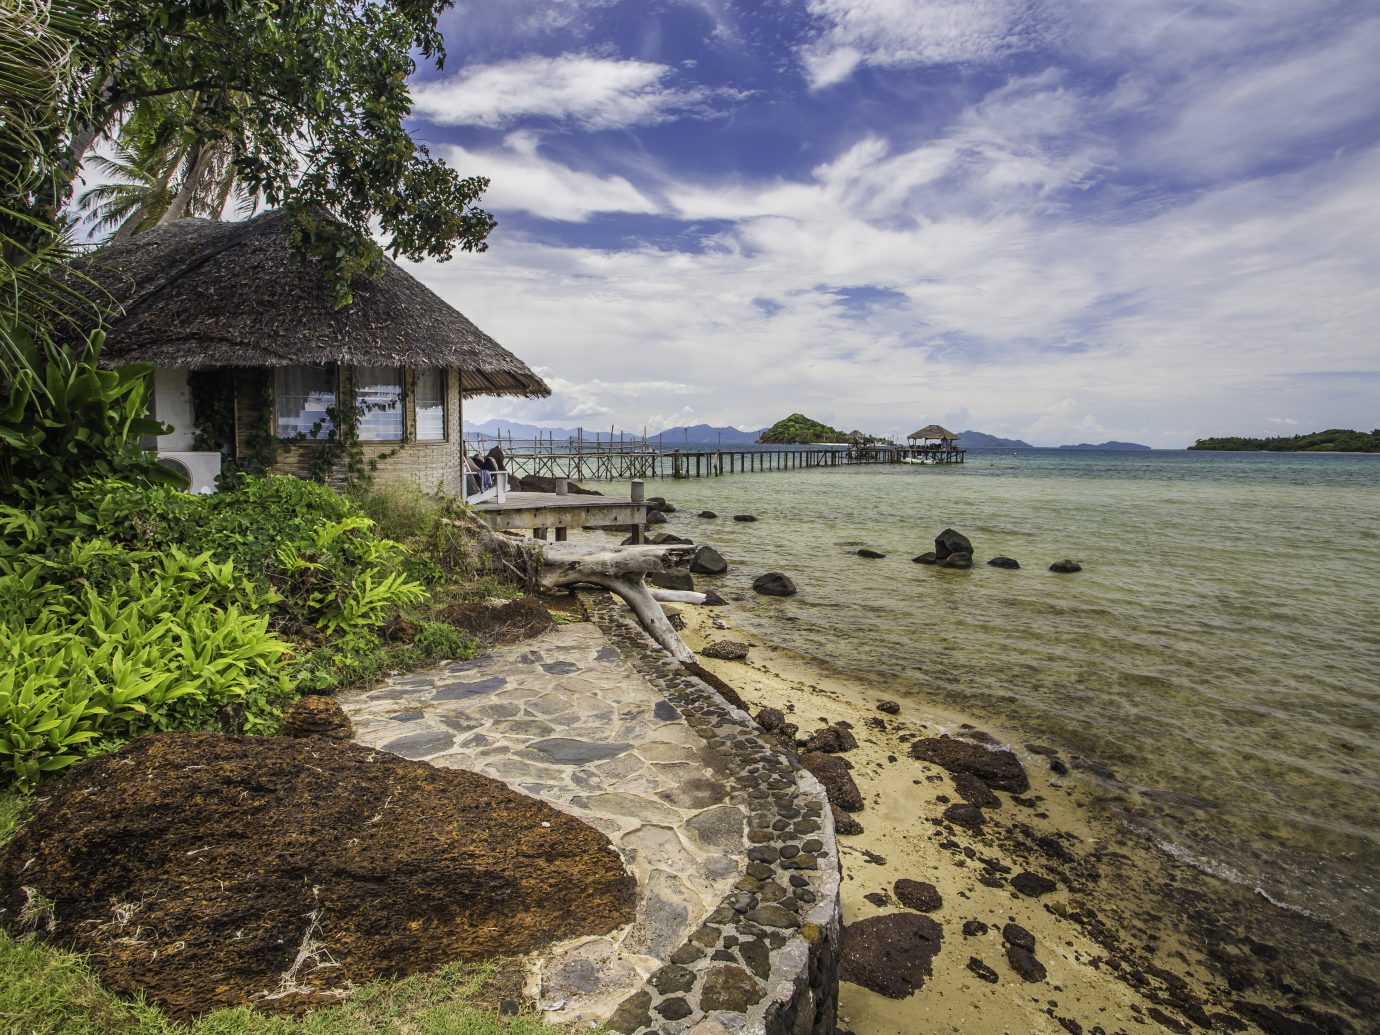 Bungalow with sea view from Koh Mak island, Thailand.